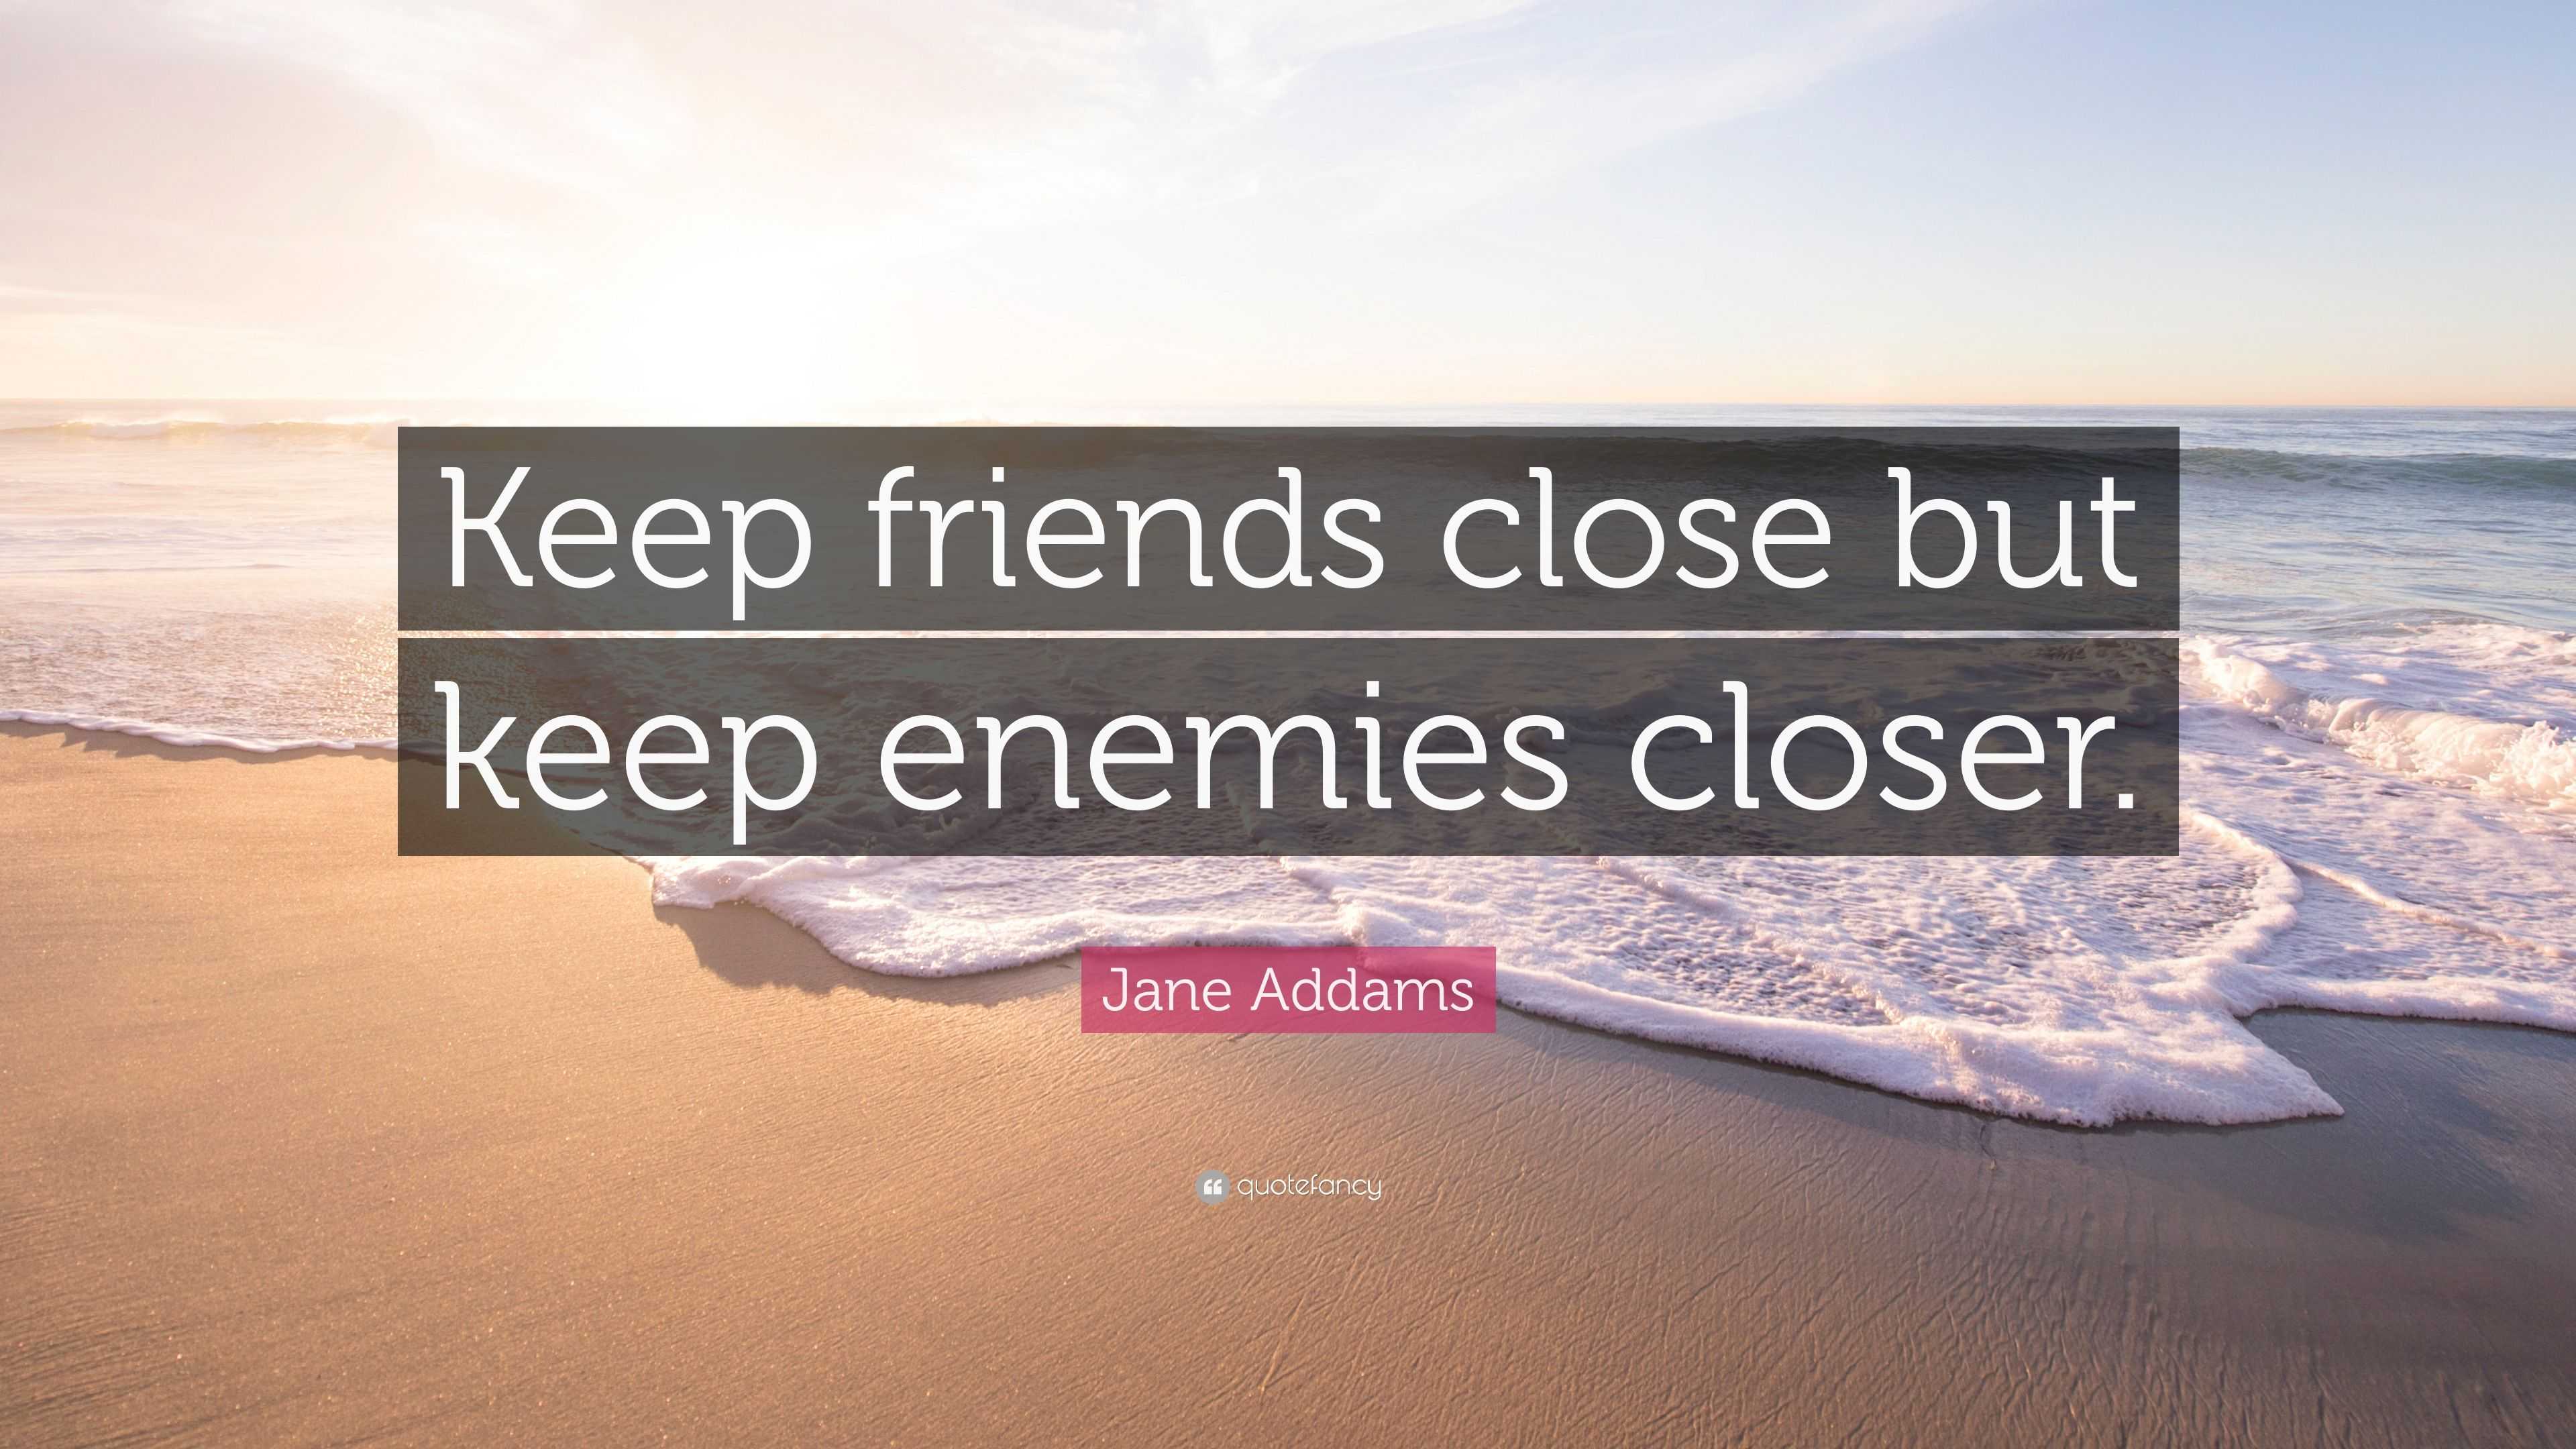 keep your enemies close